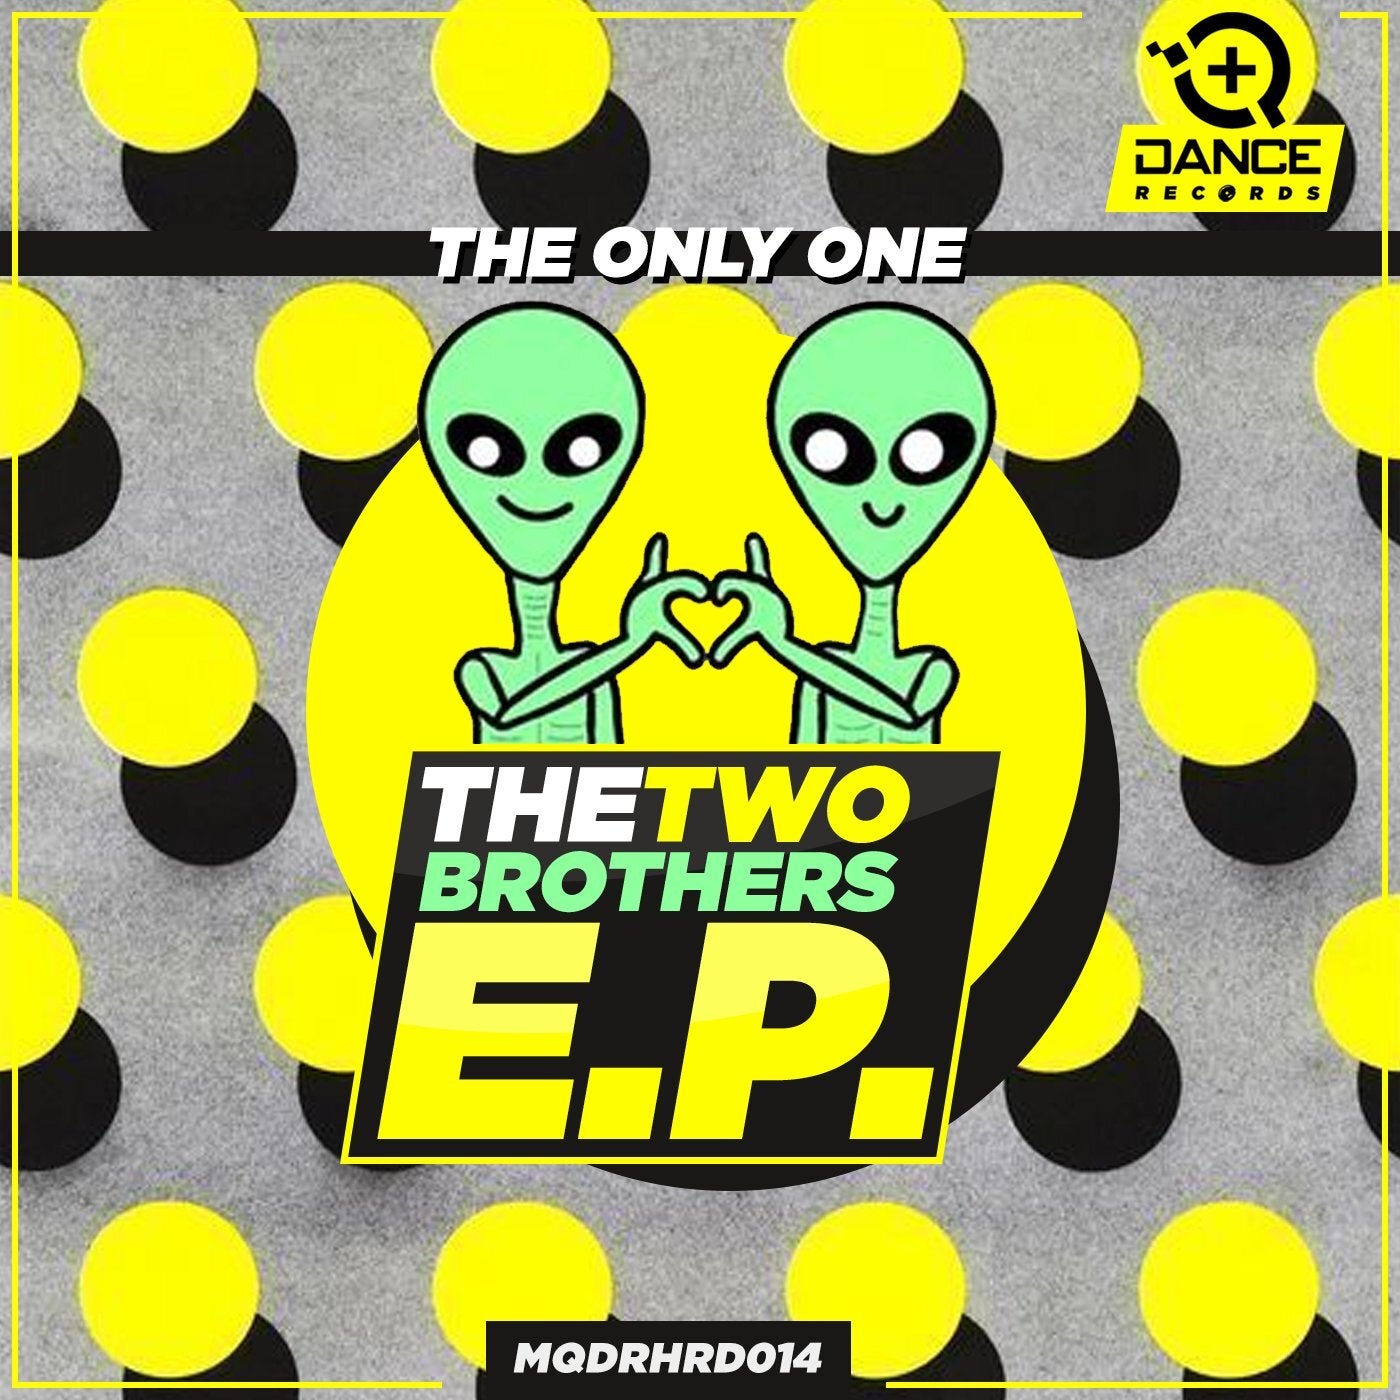 Two Brothers EP